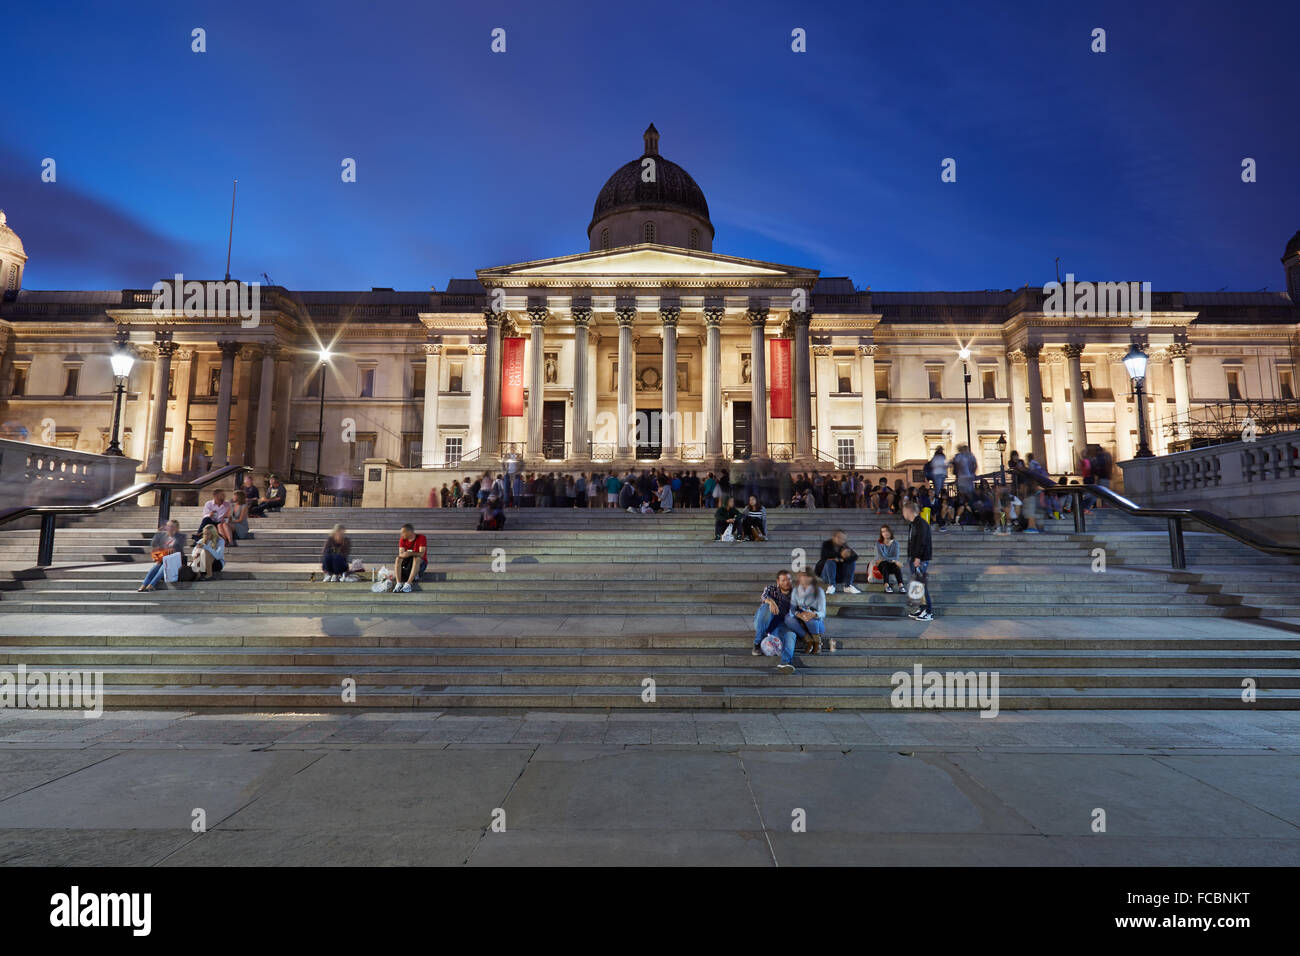 The National Gallery at Trafalgar Square in London in the evening, tourists on the stairway Stock Photo